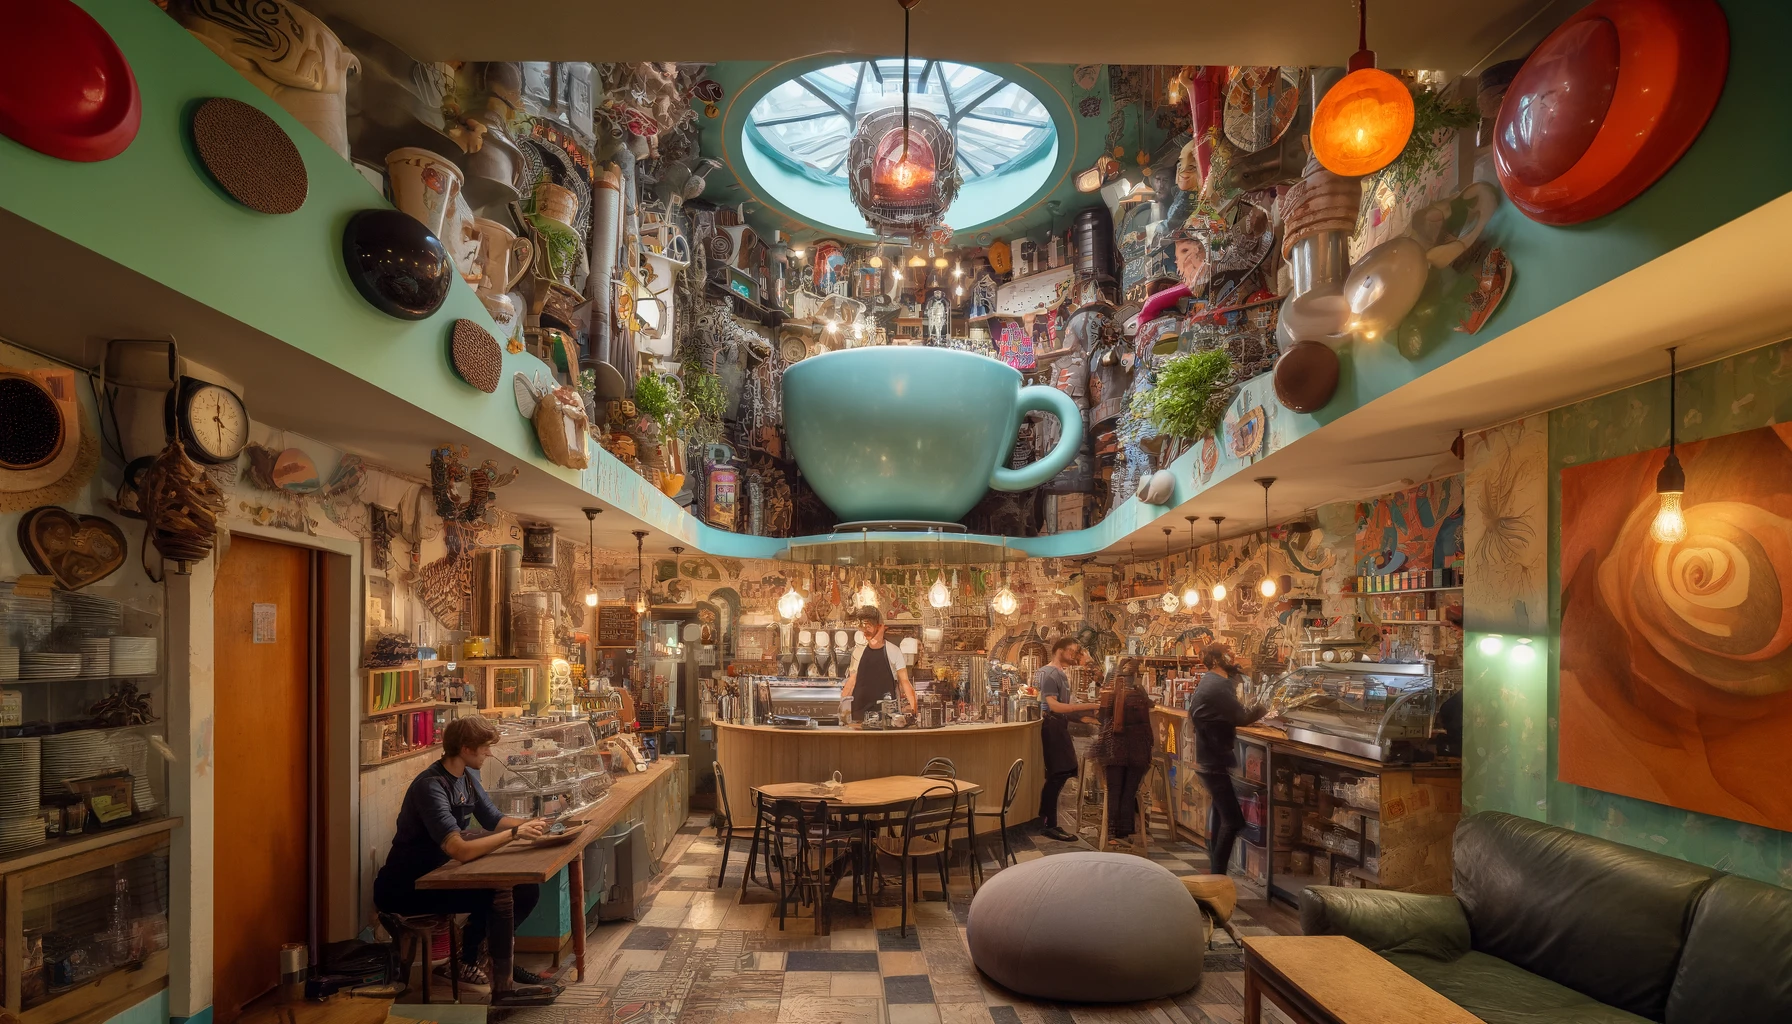 View of a quirky coffee shop named 'The Frothy Mug'. The interior is eclectic and whimsical, with mismatched furniture